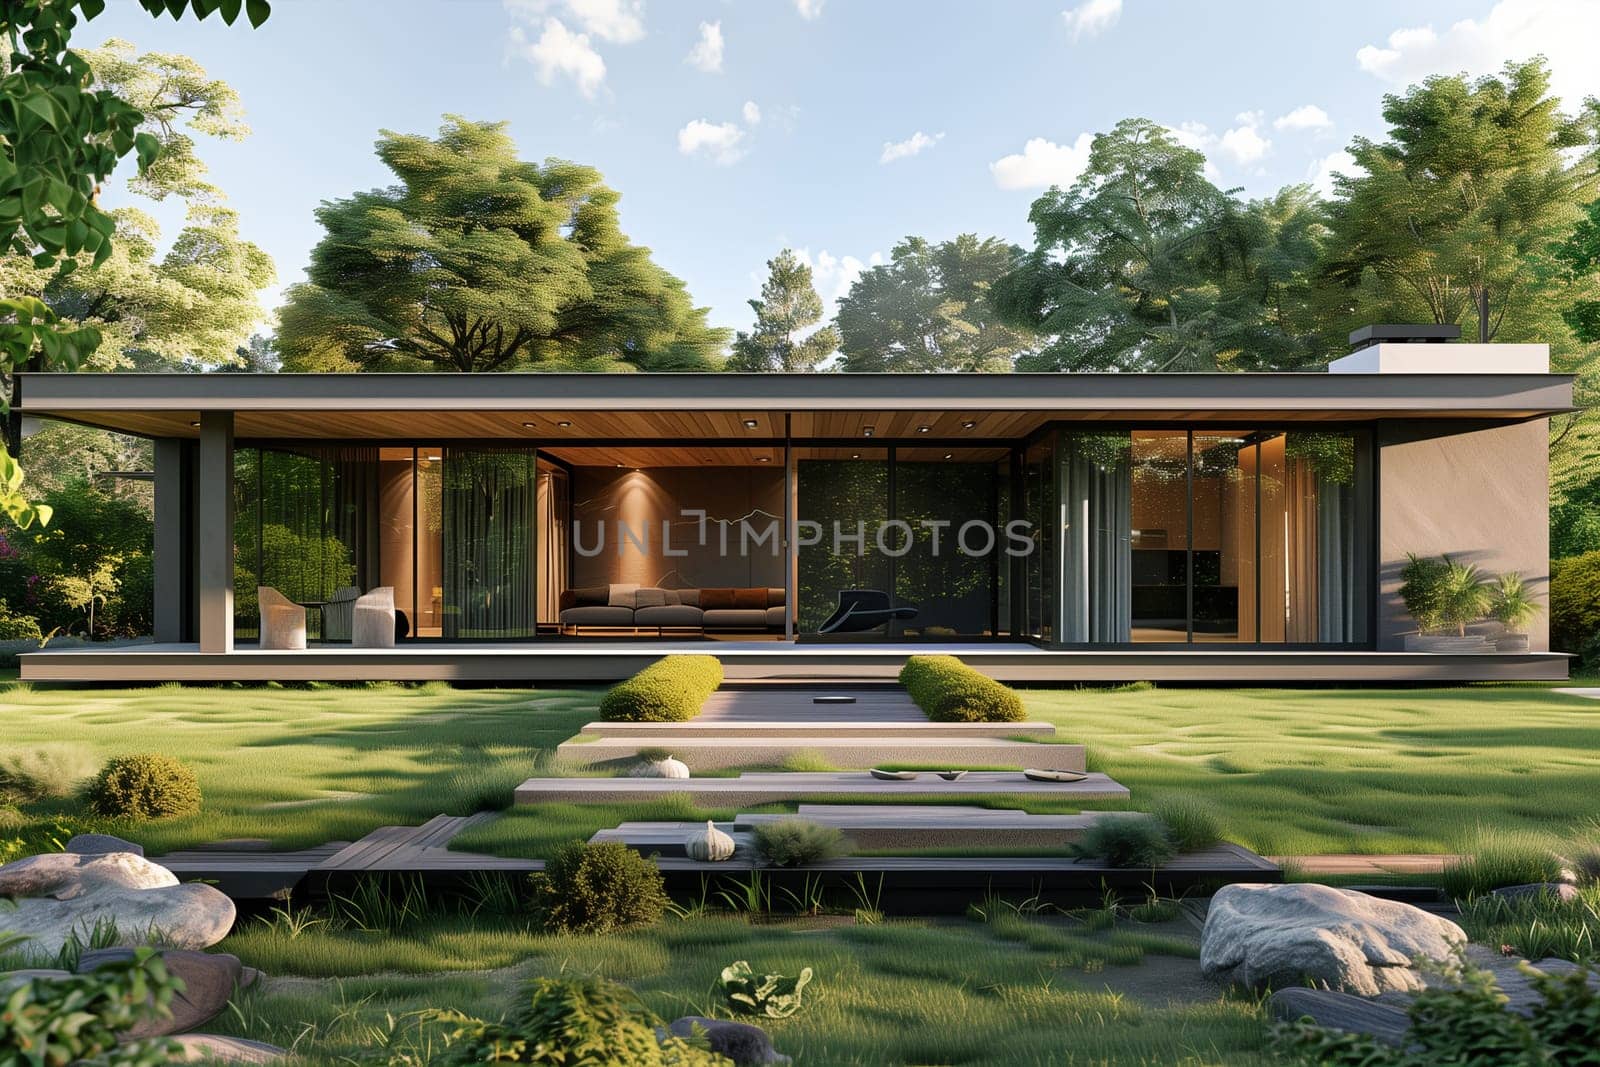 A single house stands in the center of a vibrant green field, surrounded by natures beauty.